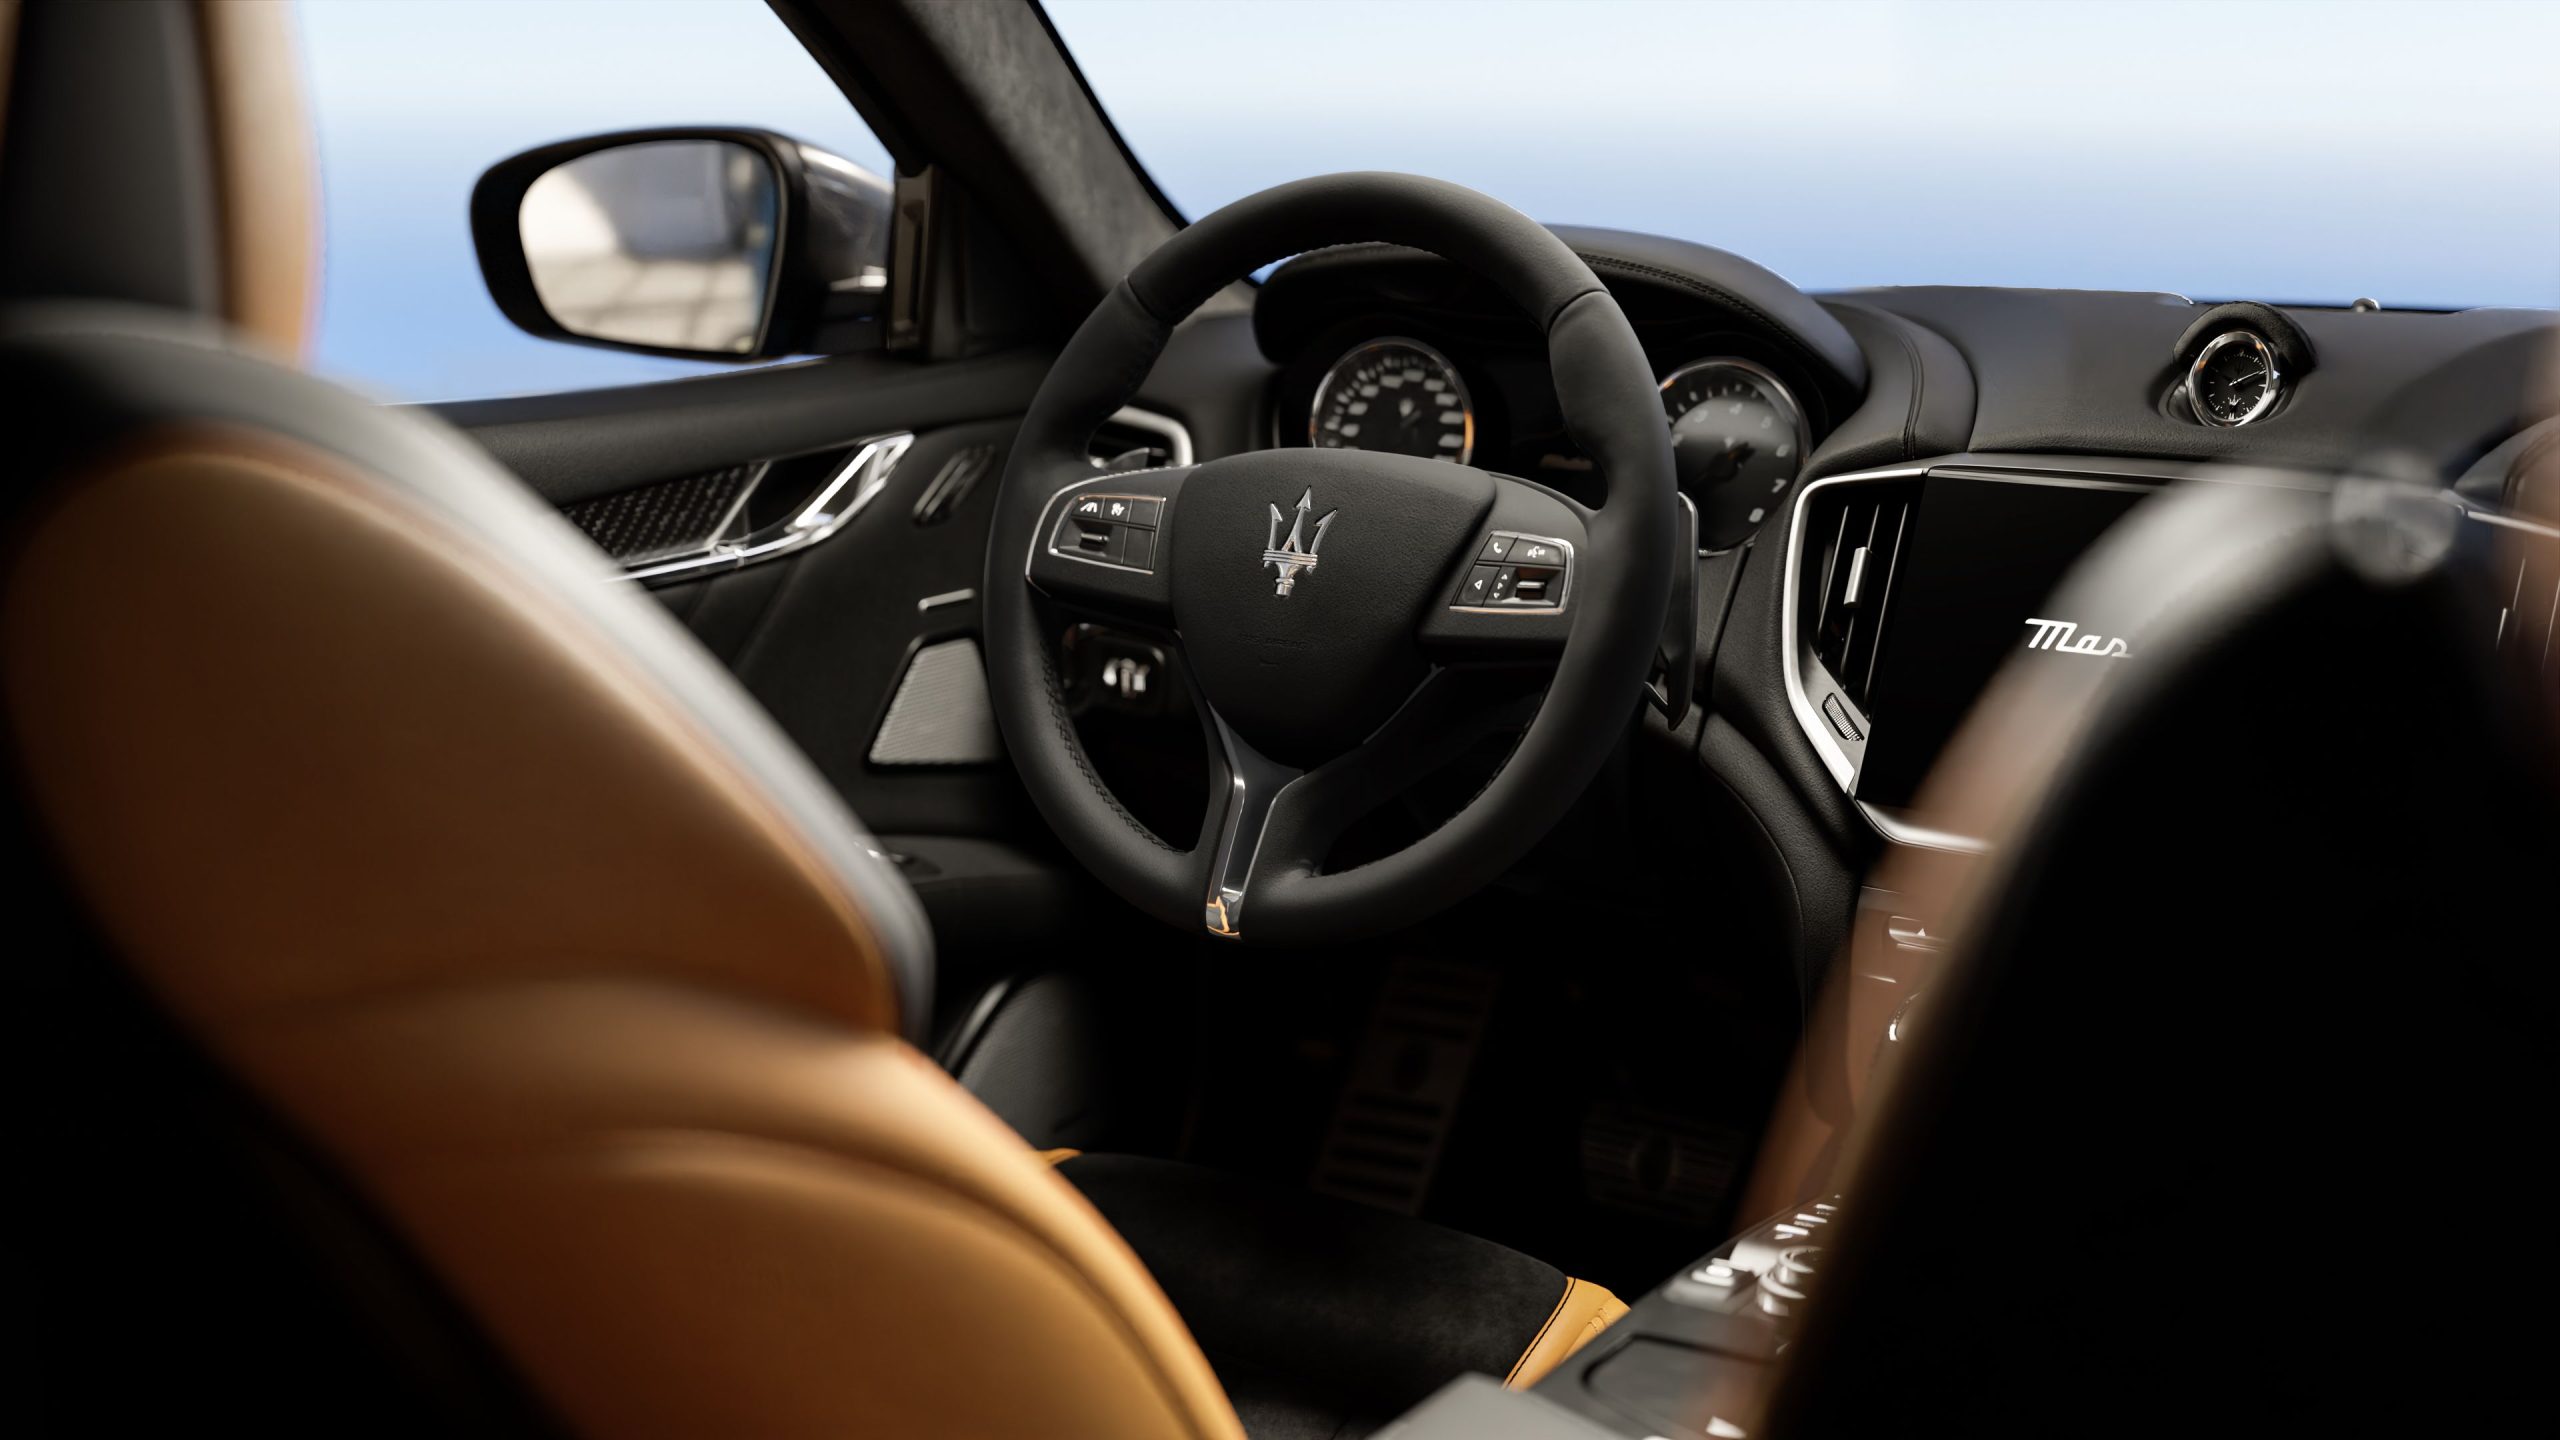 The Maserati Ghibli 334 Ultima Is High-Octane Love Letter To The V8